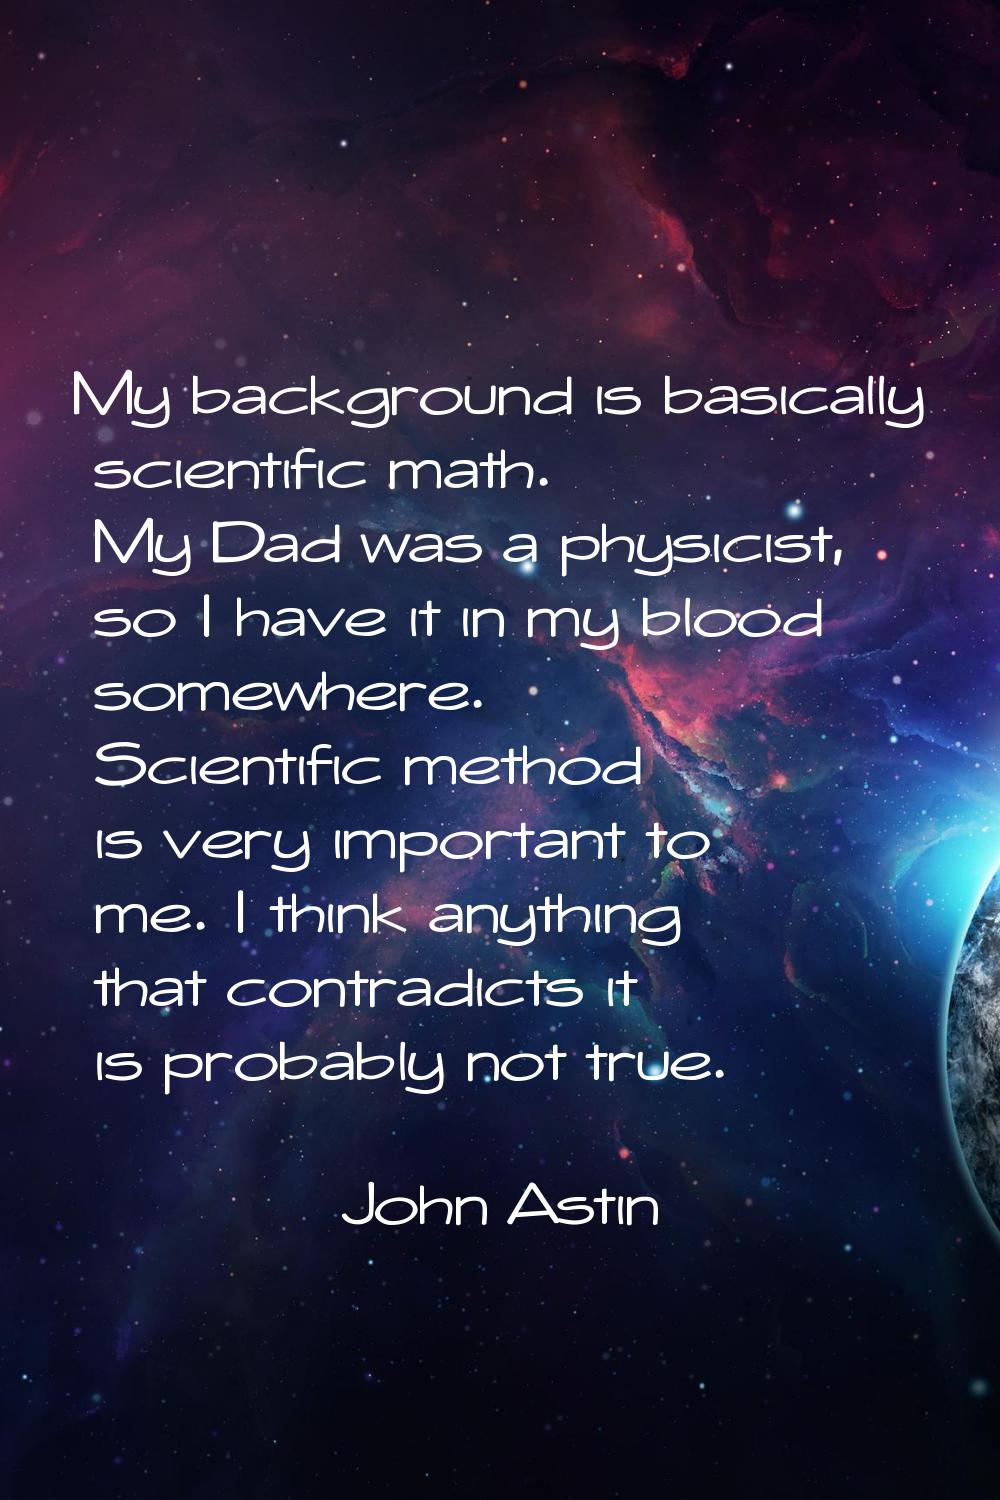 My background is basically scientific math. My Dad was a physicist, so I have it in my blood somewh